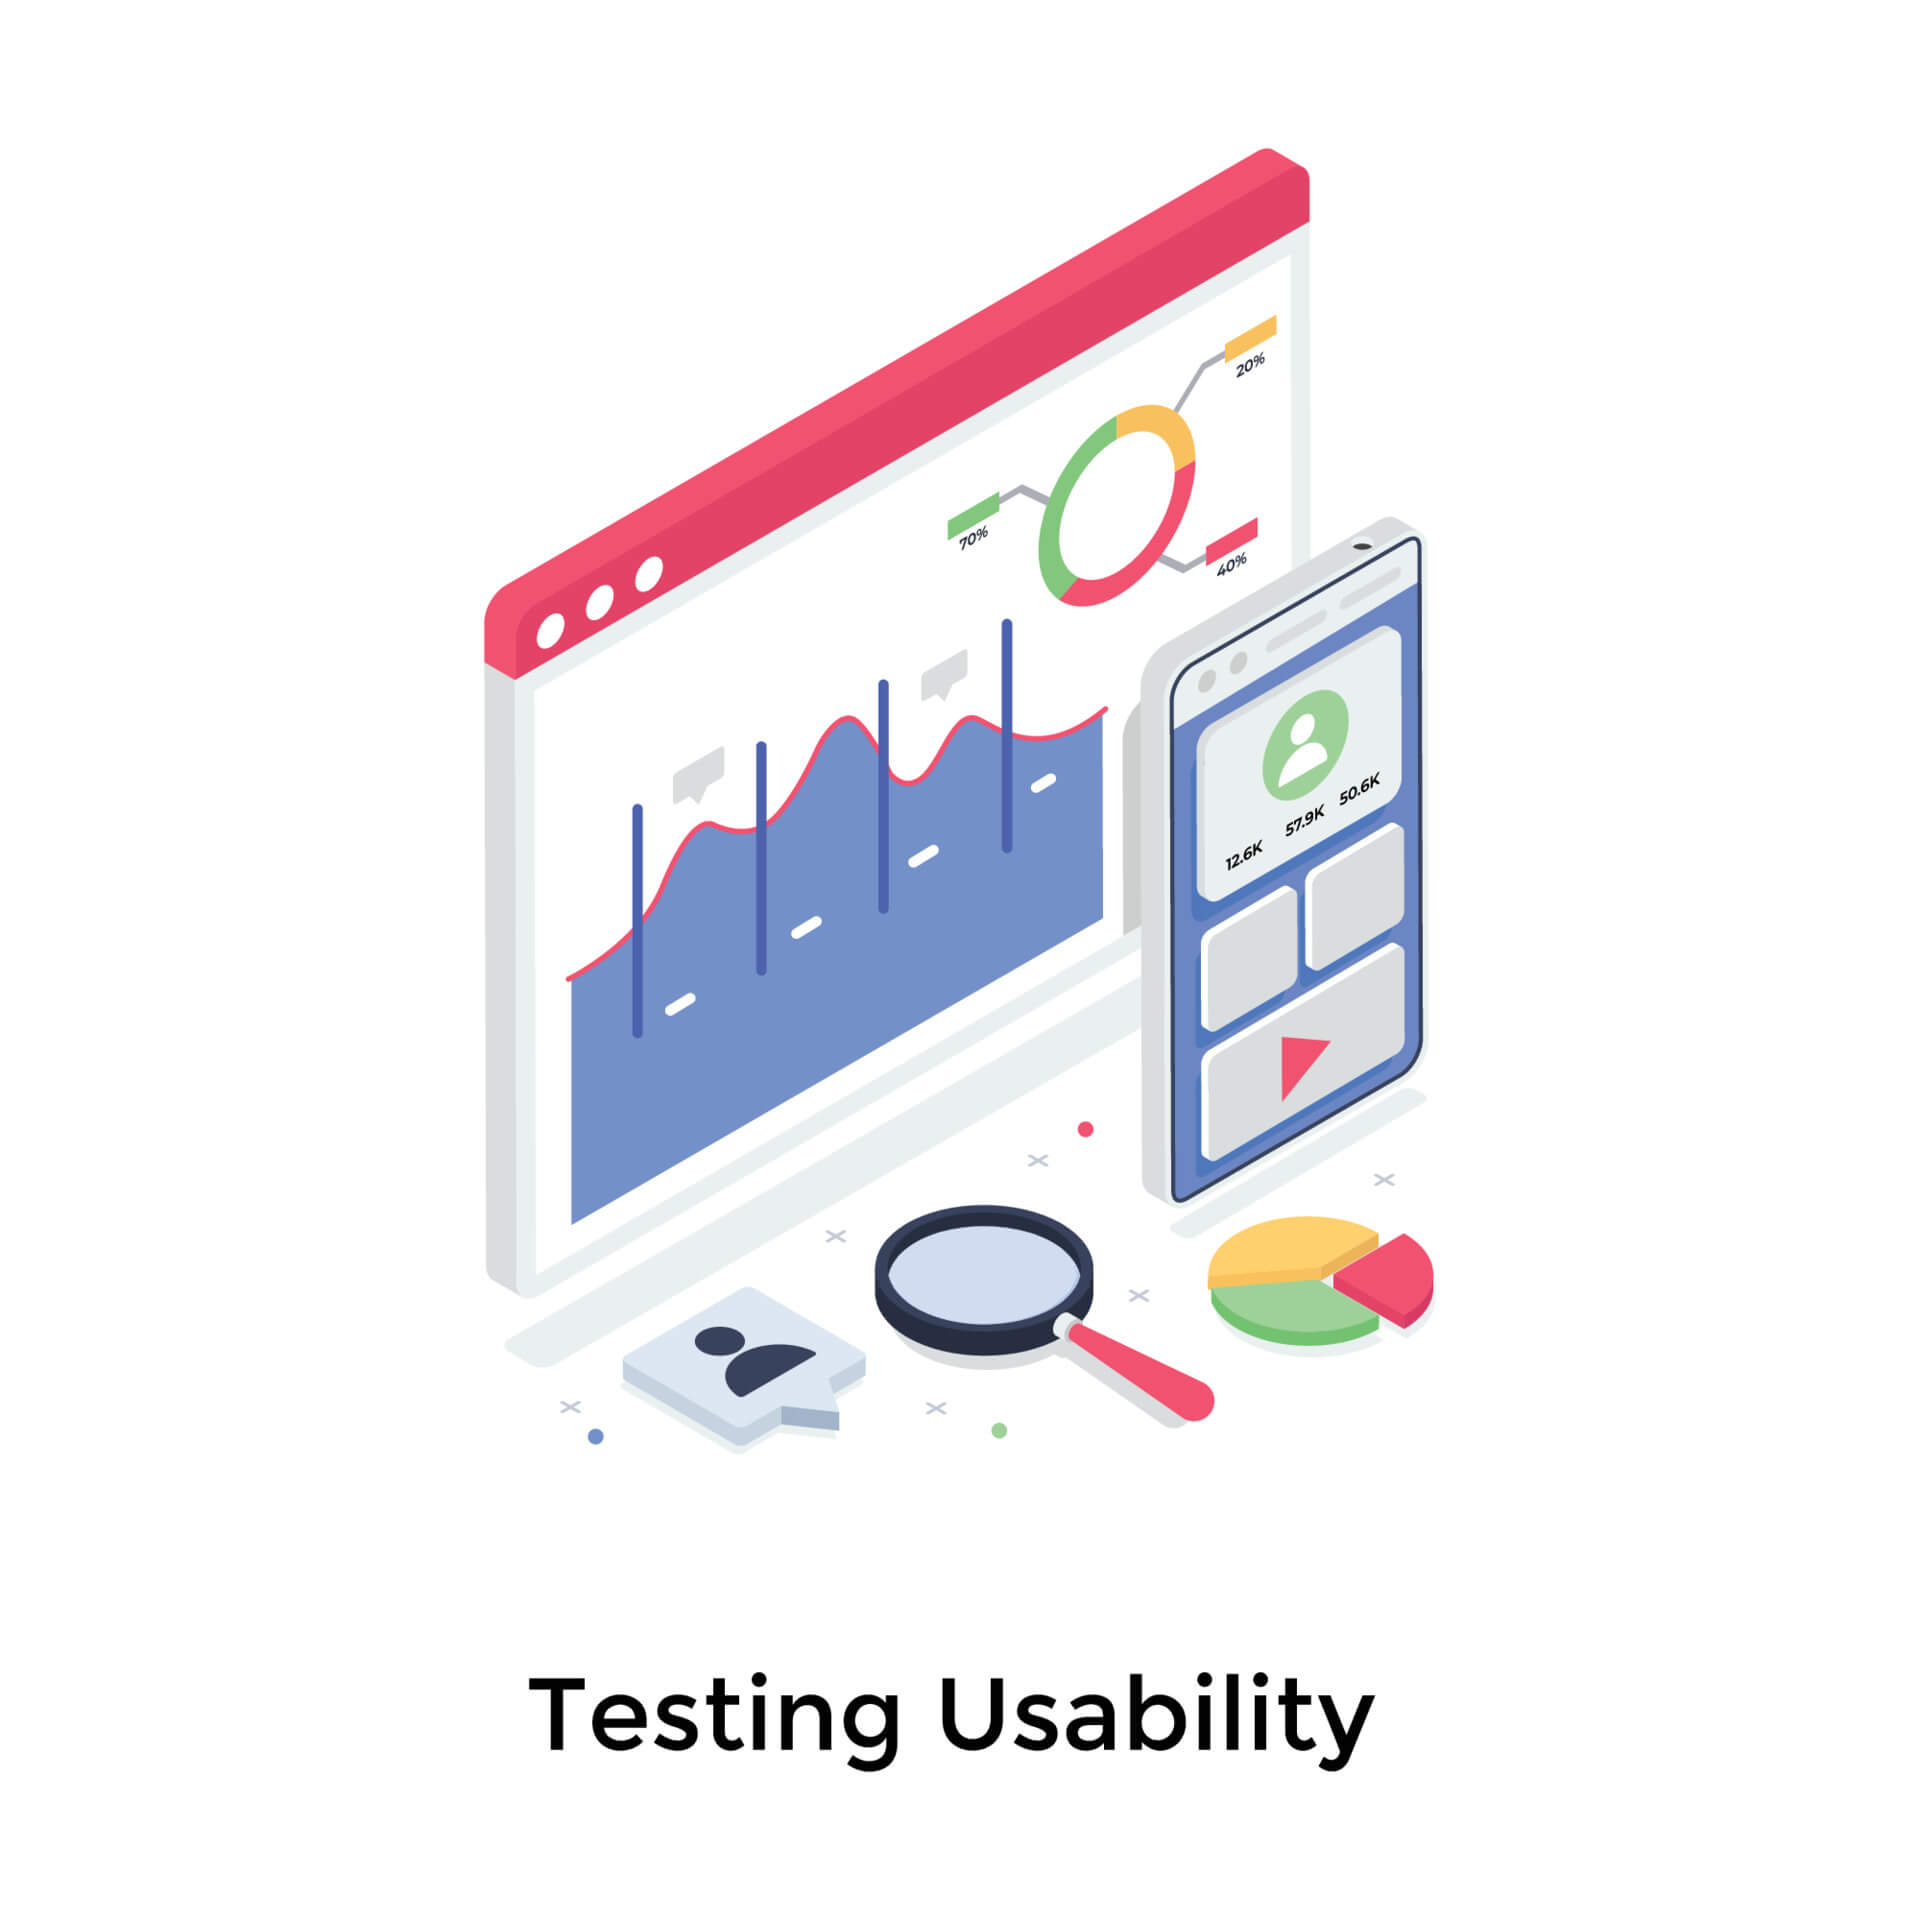 Importance of usability testing